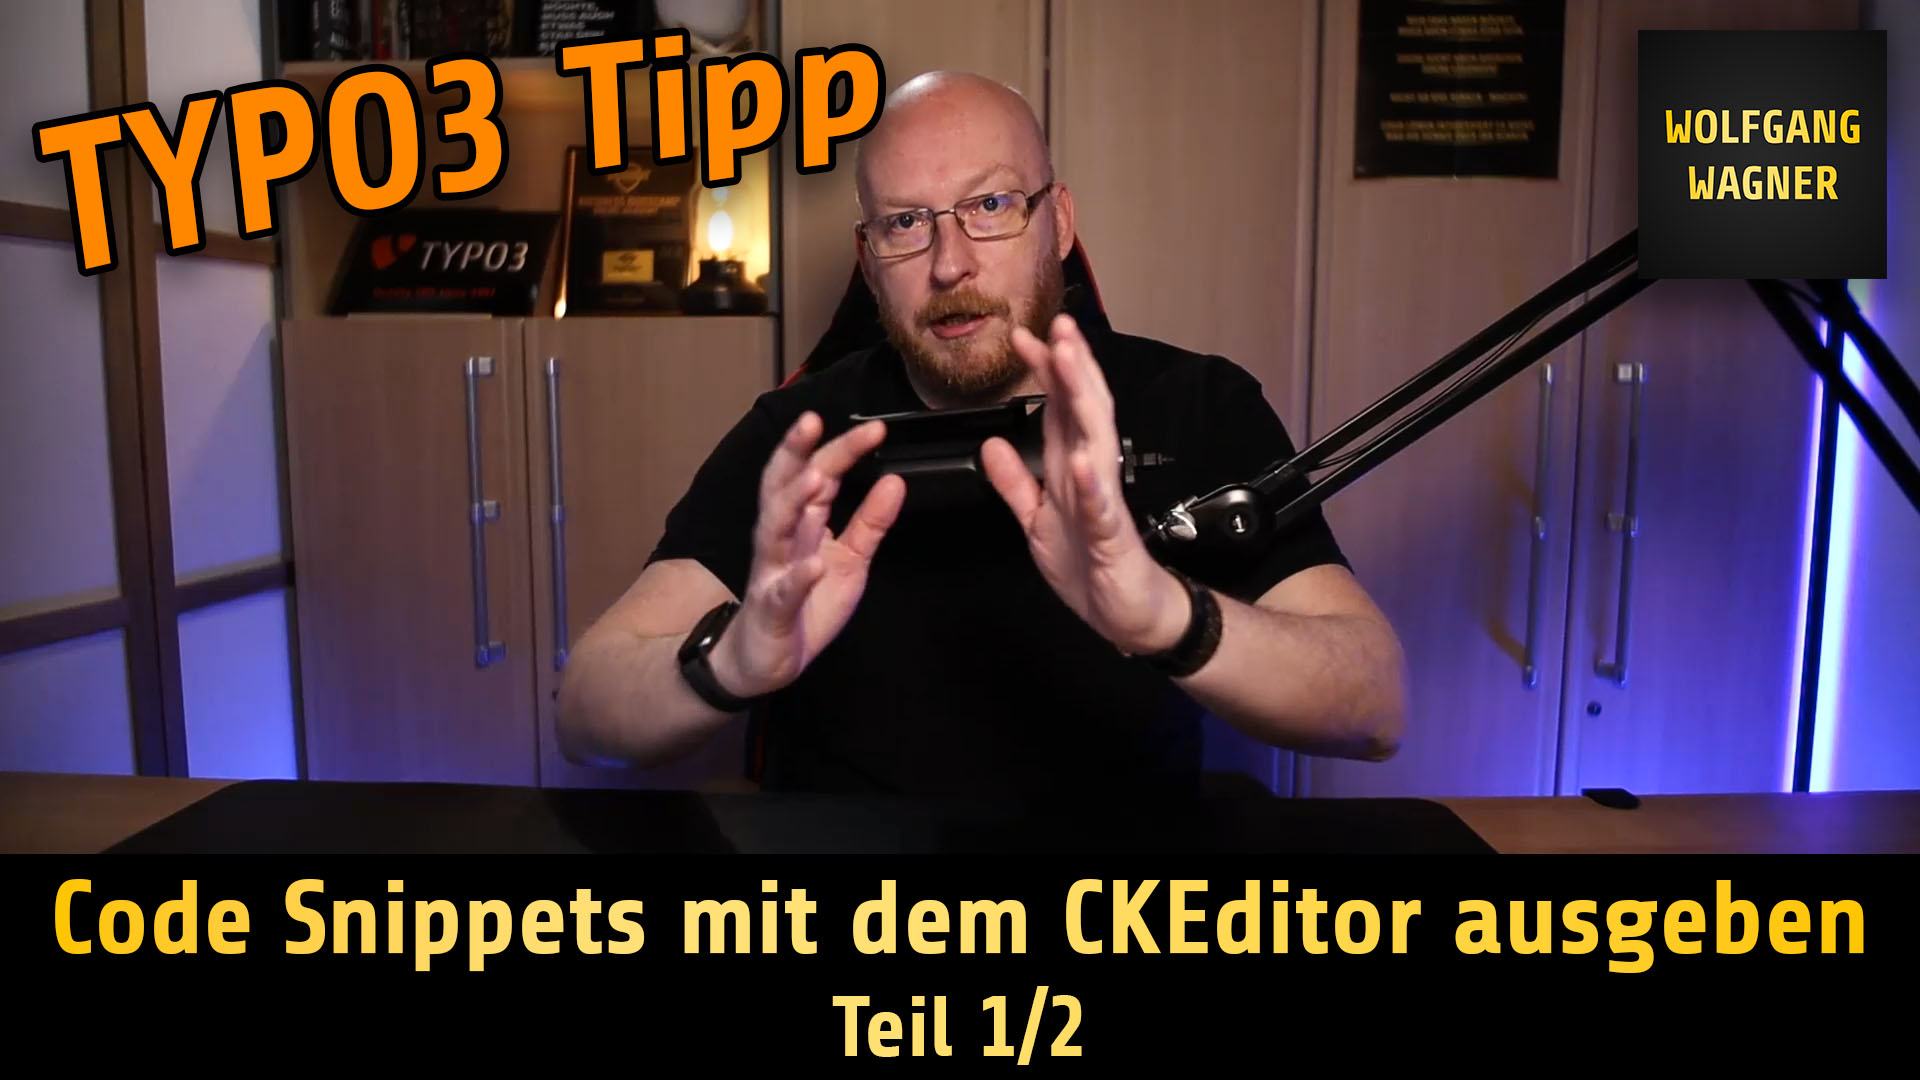 You are currently viewing TYPO3-Tipp: Code Snippets mit dem CKEditor ausgeben, Teil 1/2